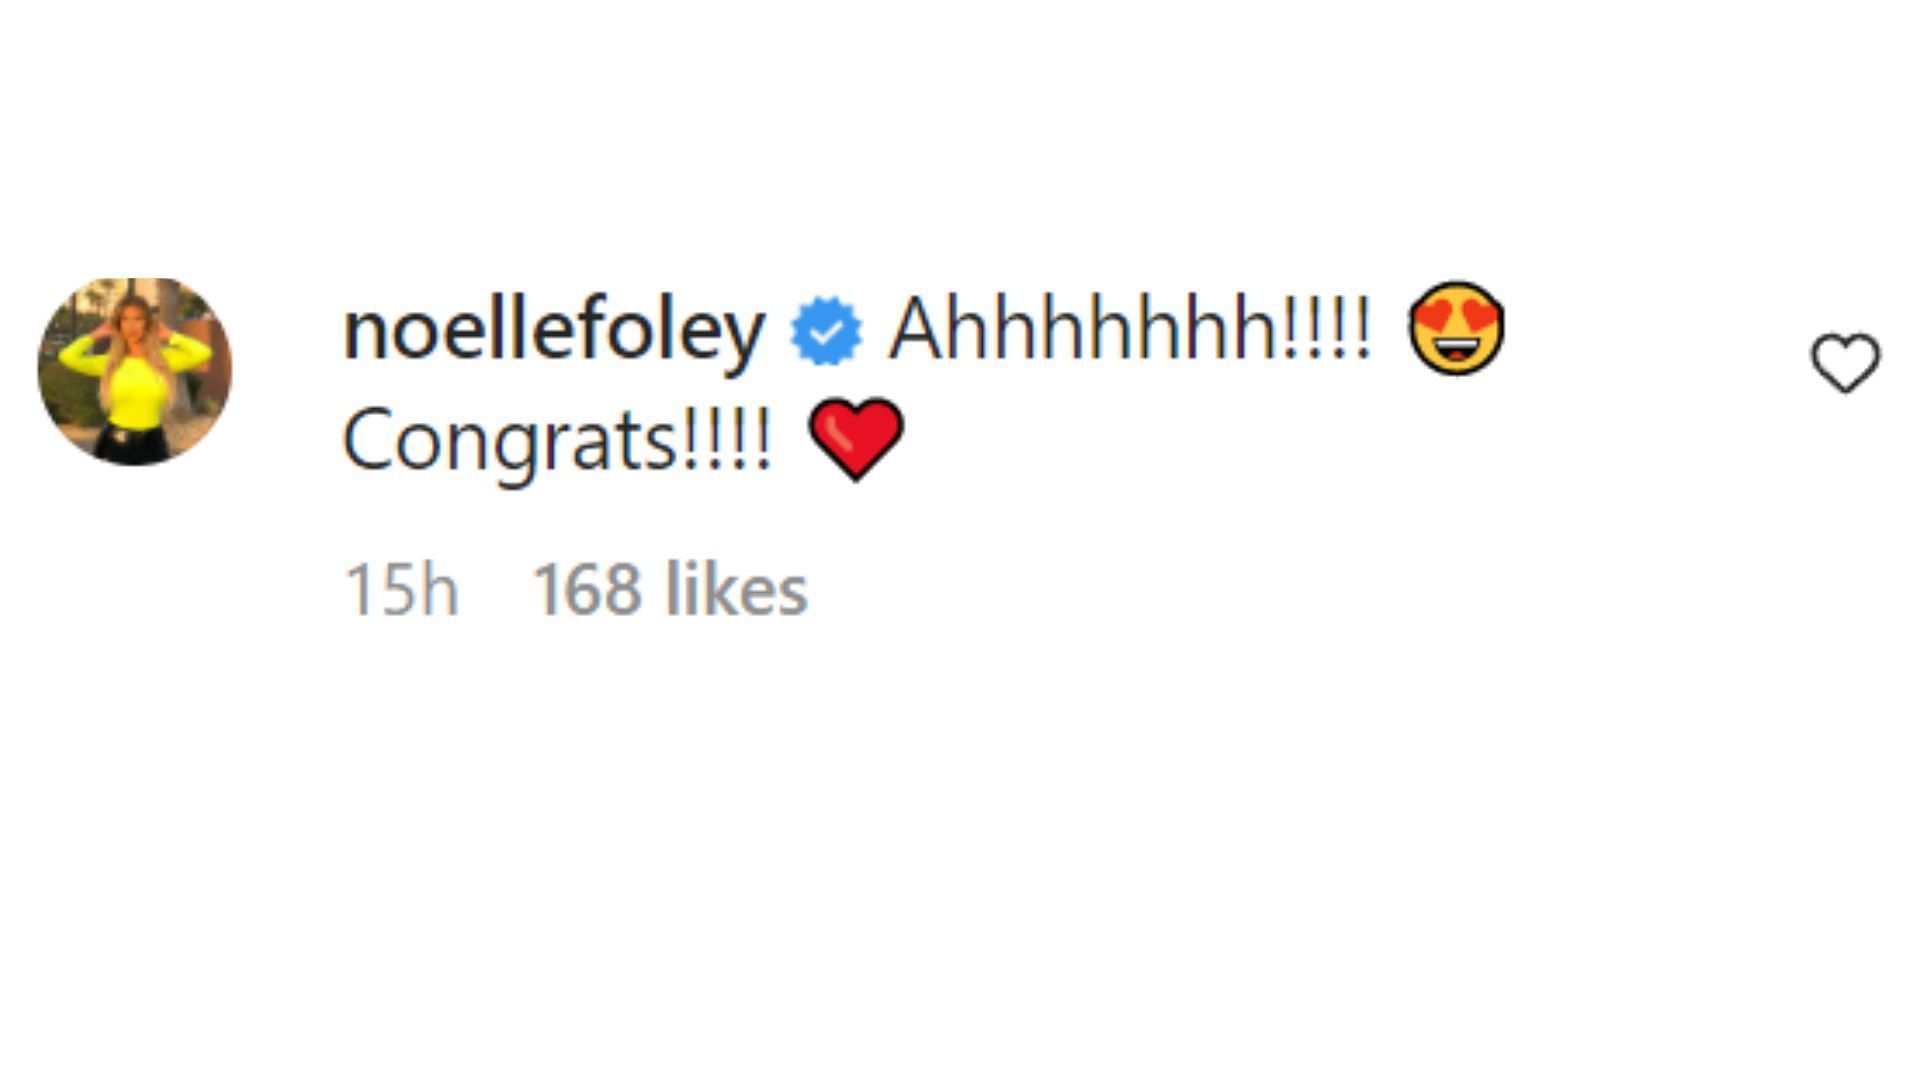 The daughter of the legendary Mick Foley, Noelle, congratulated Paquette.